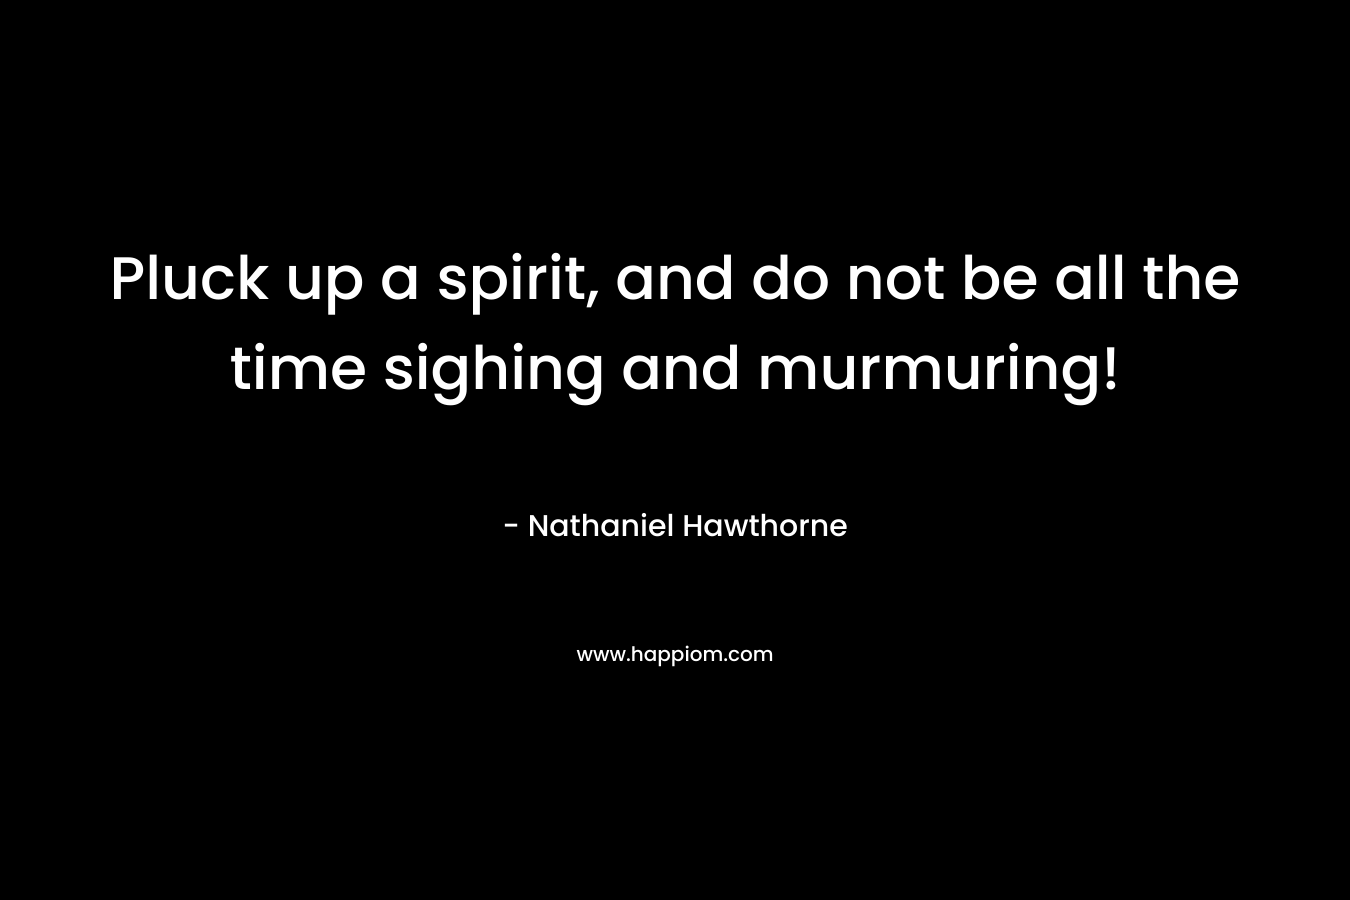 Pluck up a spirit, and do not be all the time sighing and murmuring! – Nathaniel Hawthorne